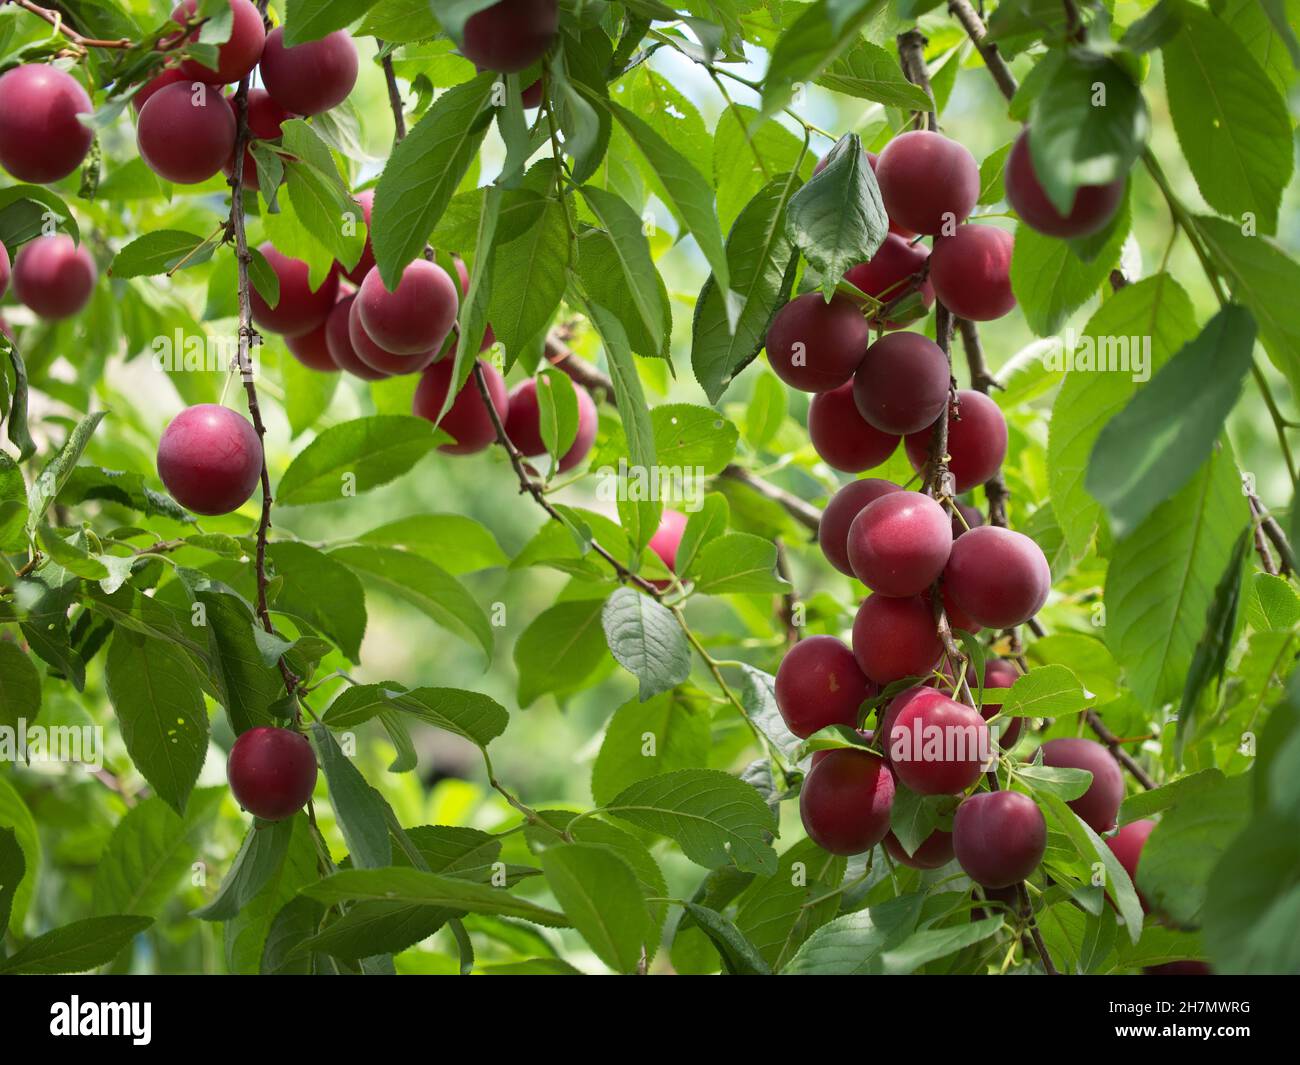 There are a lot of red cherry plum berries on the branches of the tree. Ripe fruit in the garden. Stock Photo